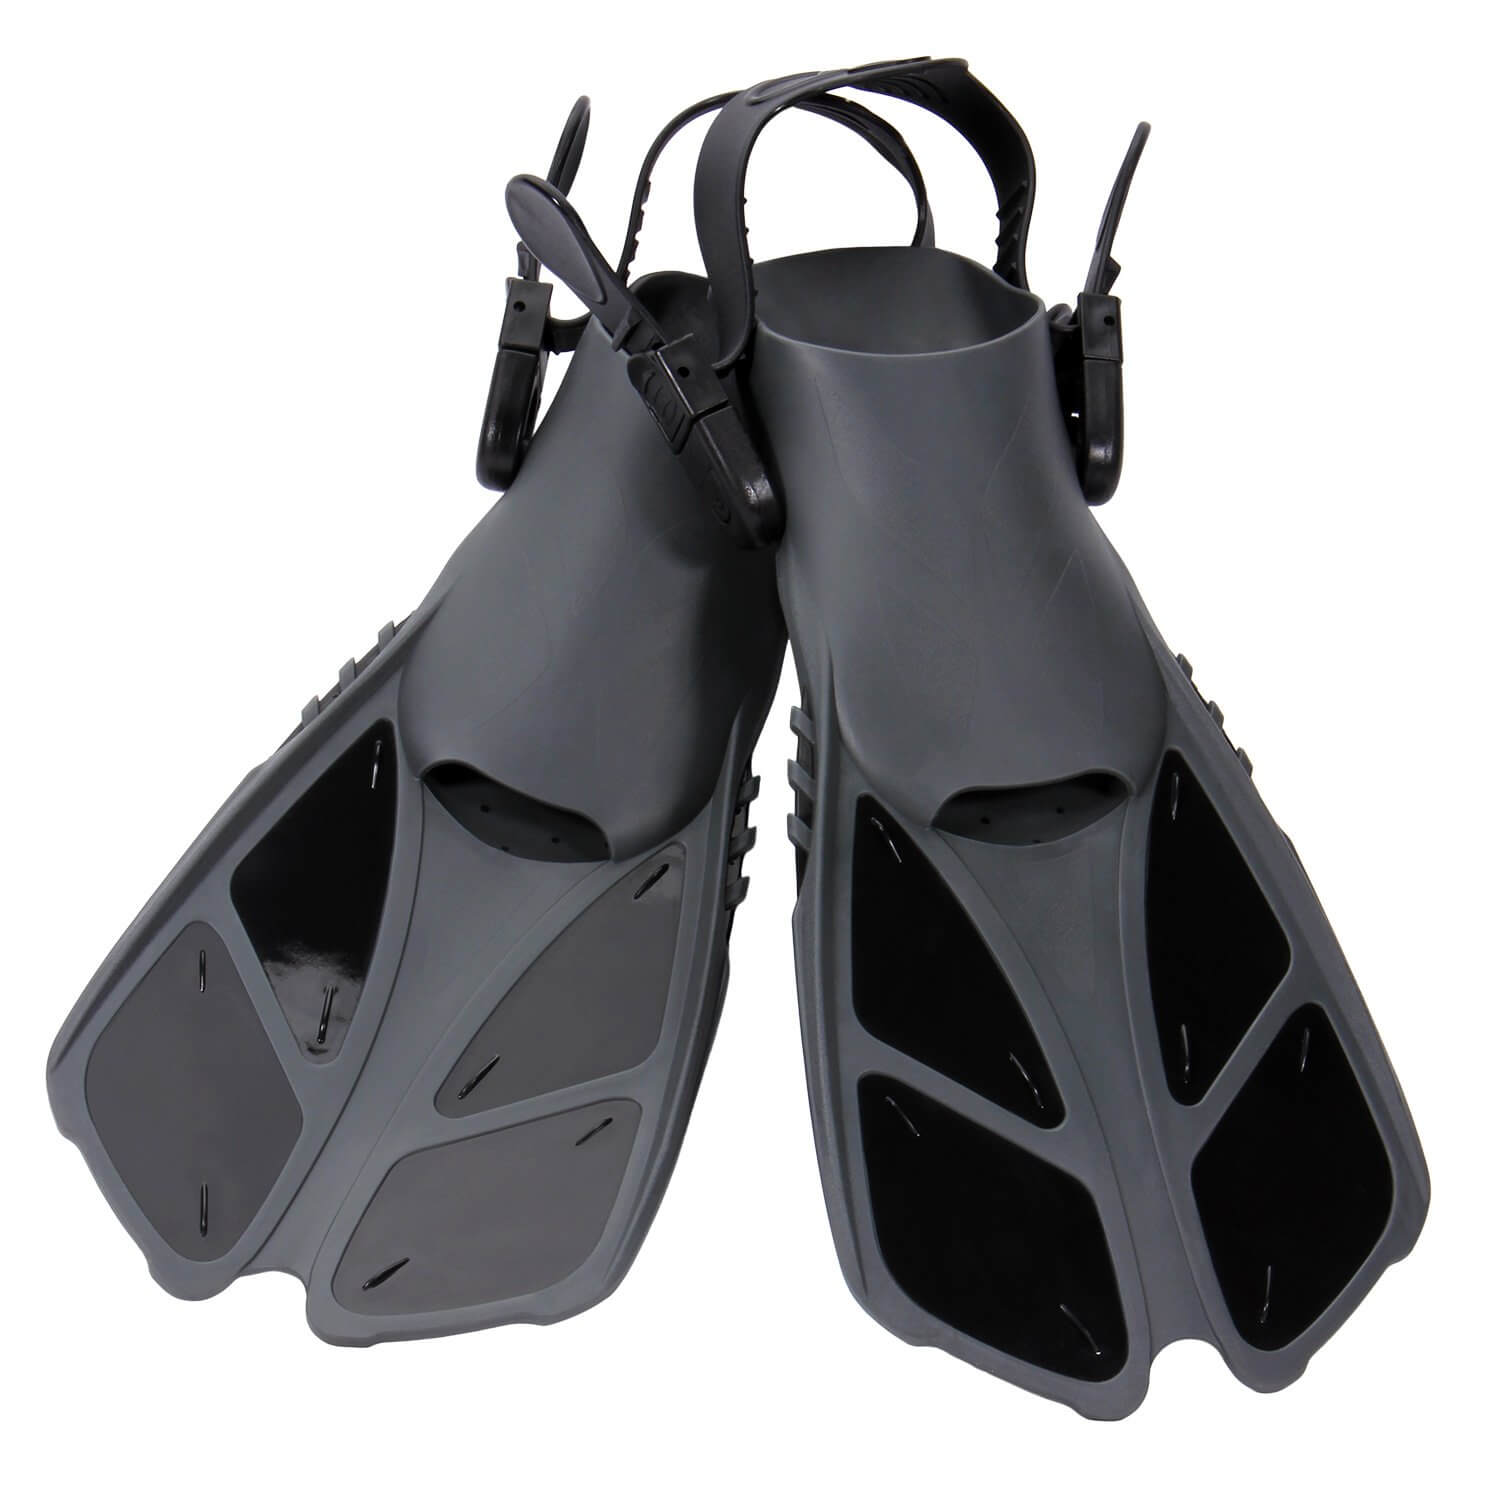 Which Swimming Flippers Are Best For You?